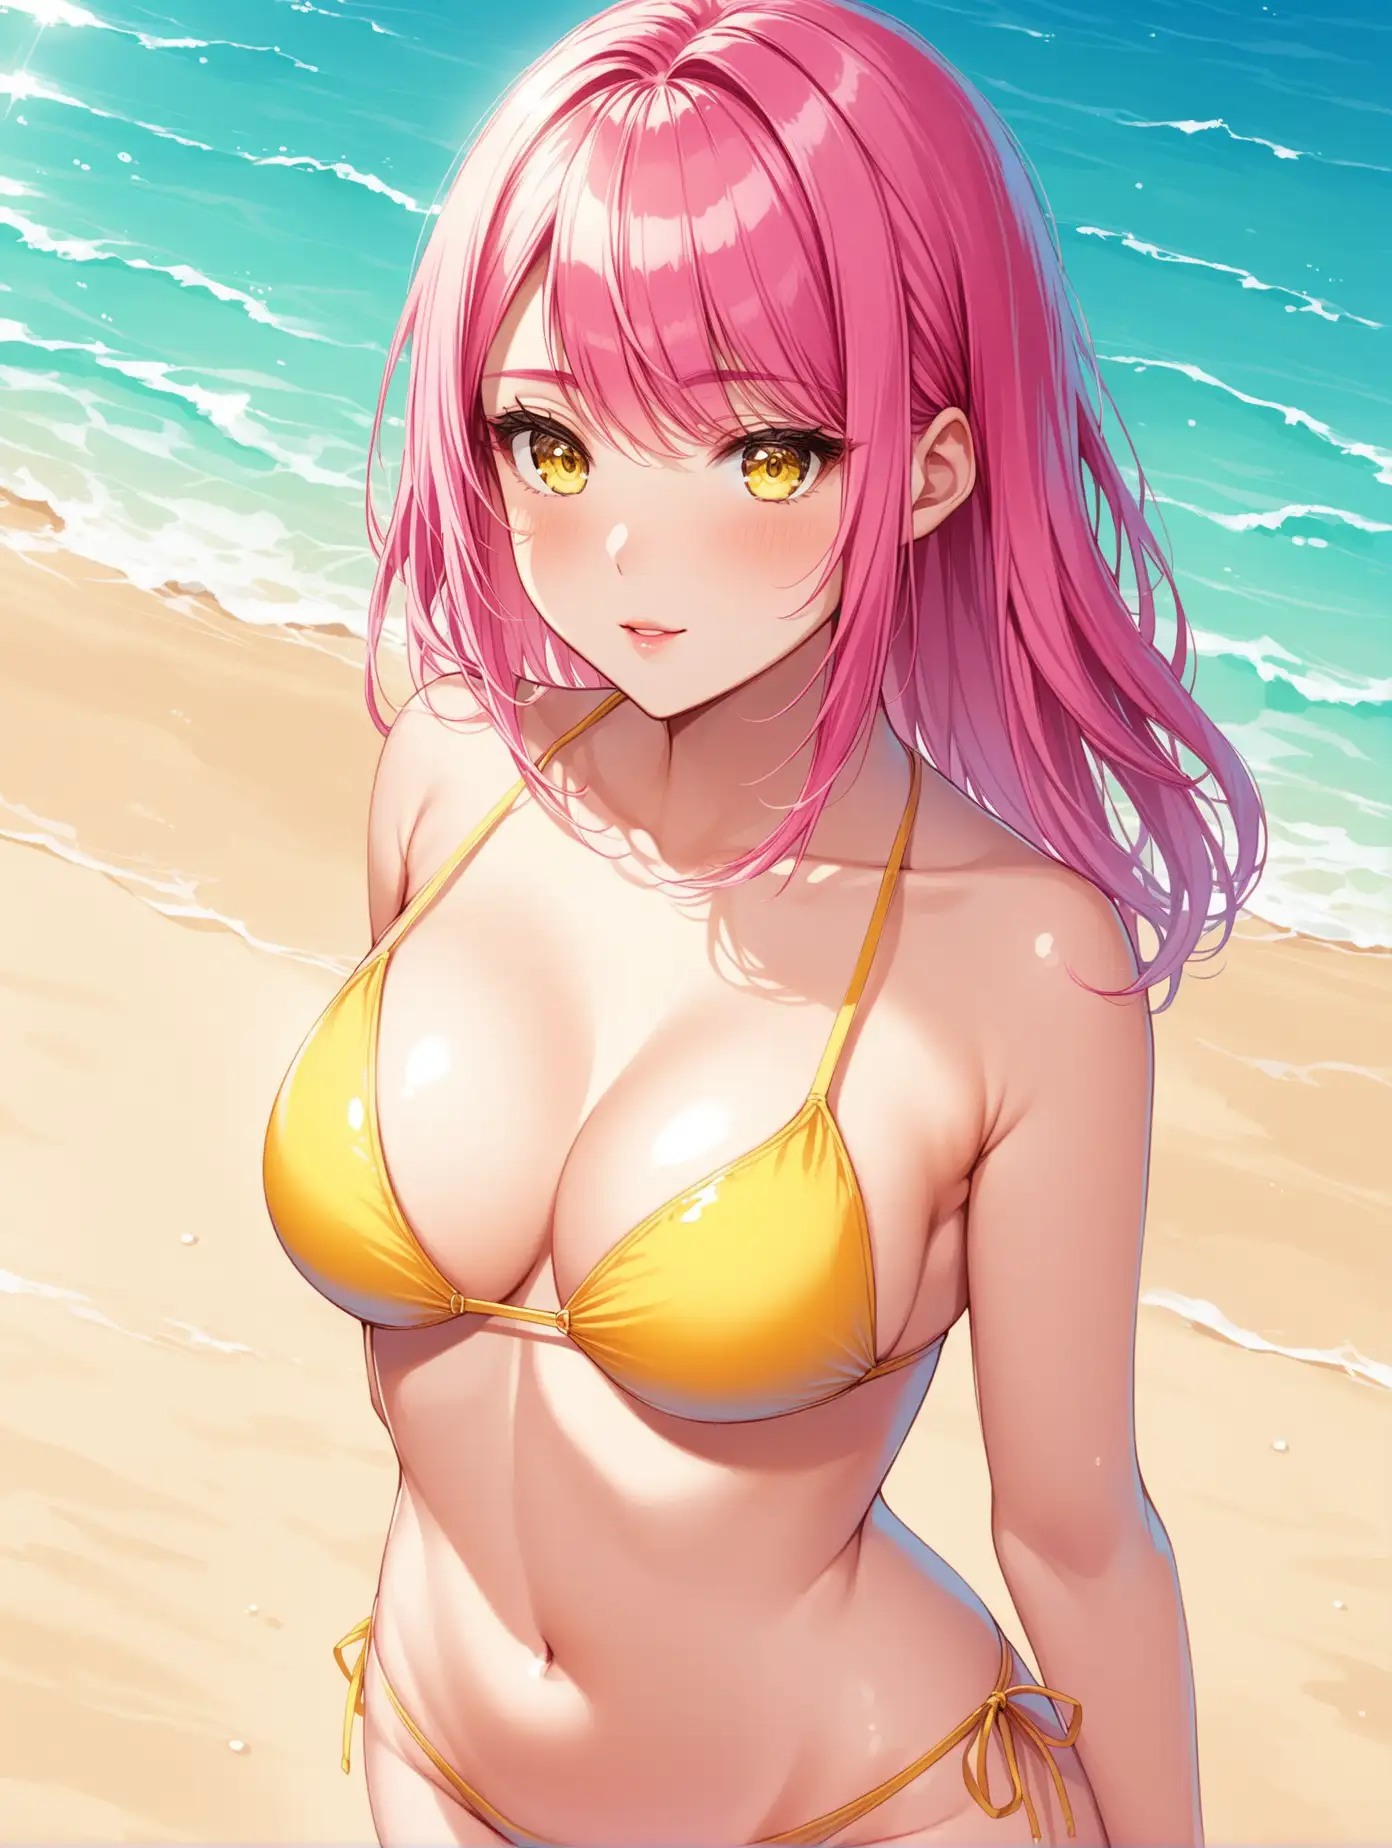 Sensual Woman with Pink Hair and Yellow Eyes in Swimsuit